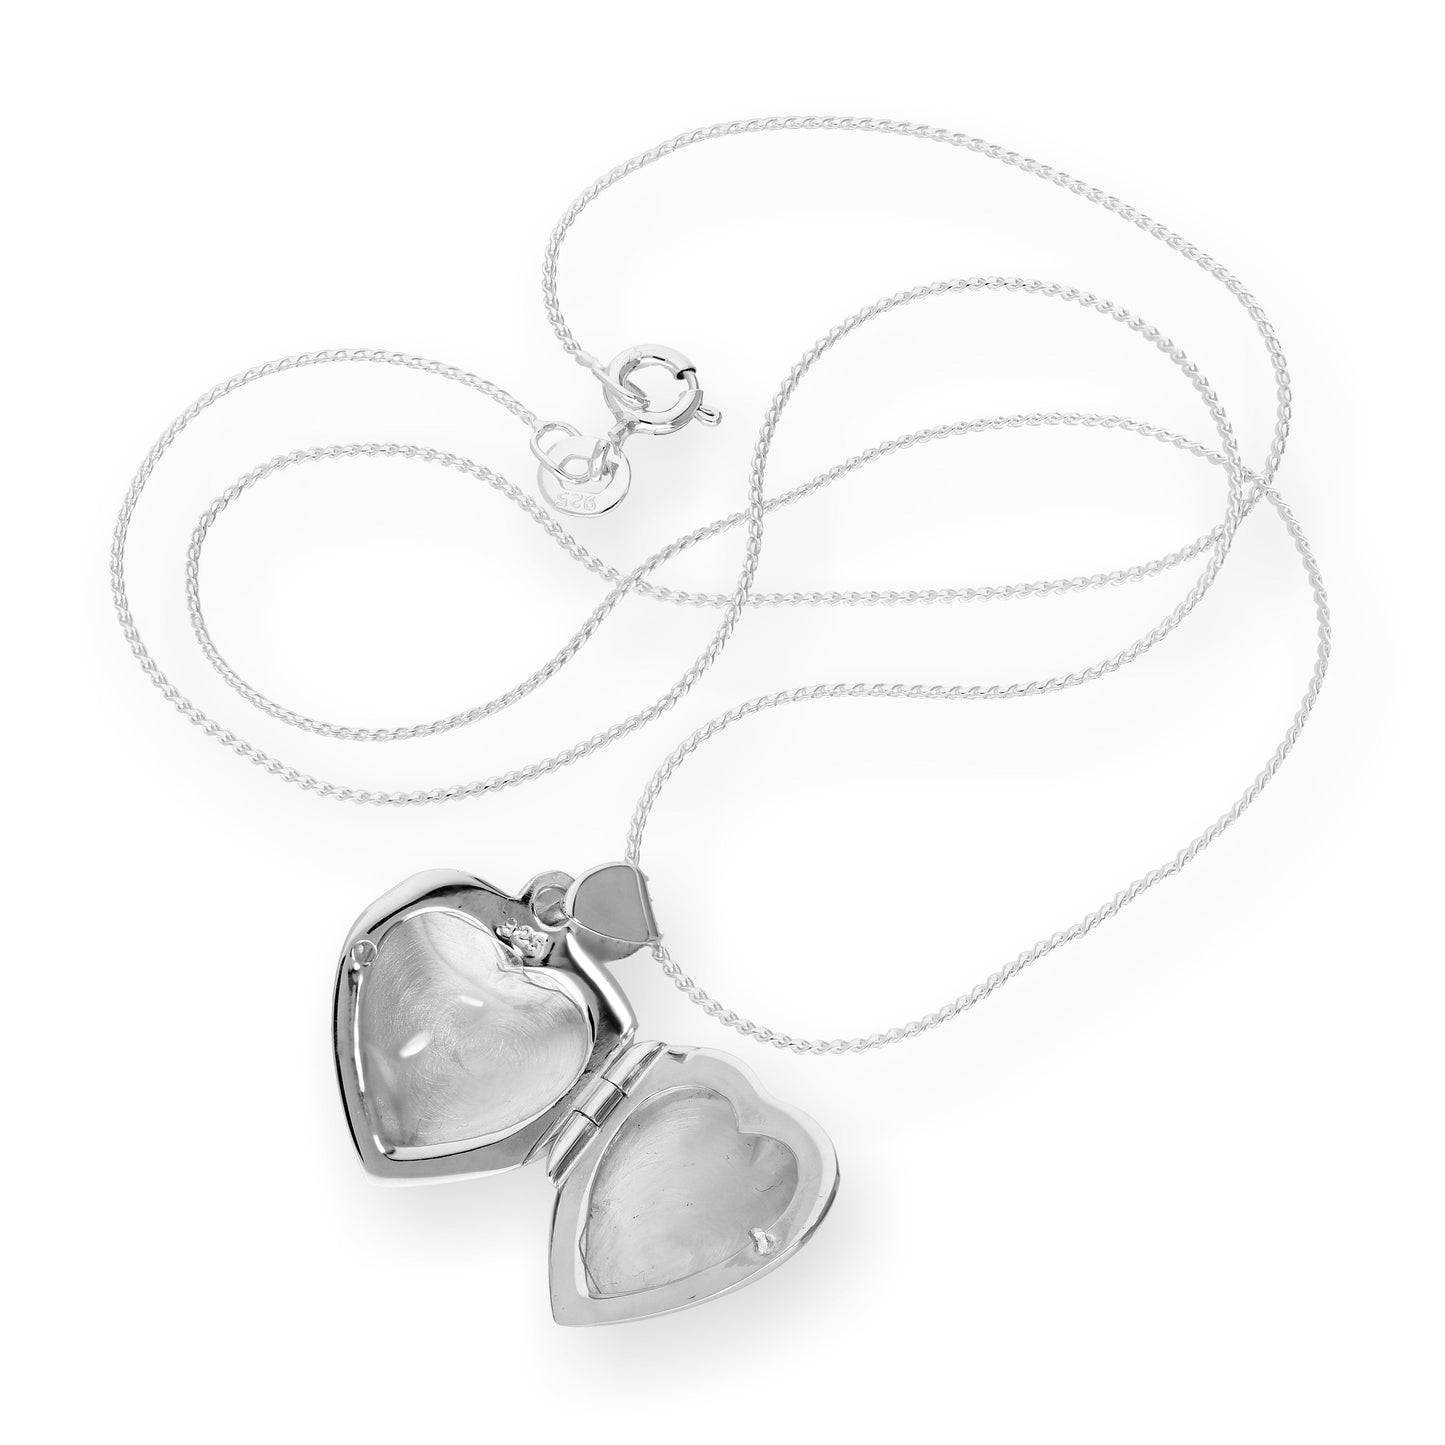 Sterling Silver Engravable Puffed Heart Locket on Chain 16 - 22 Inches